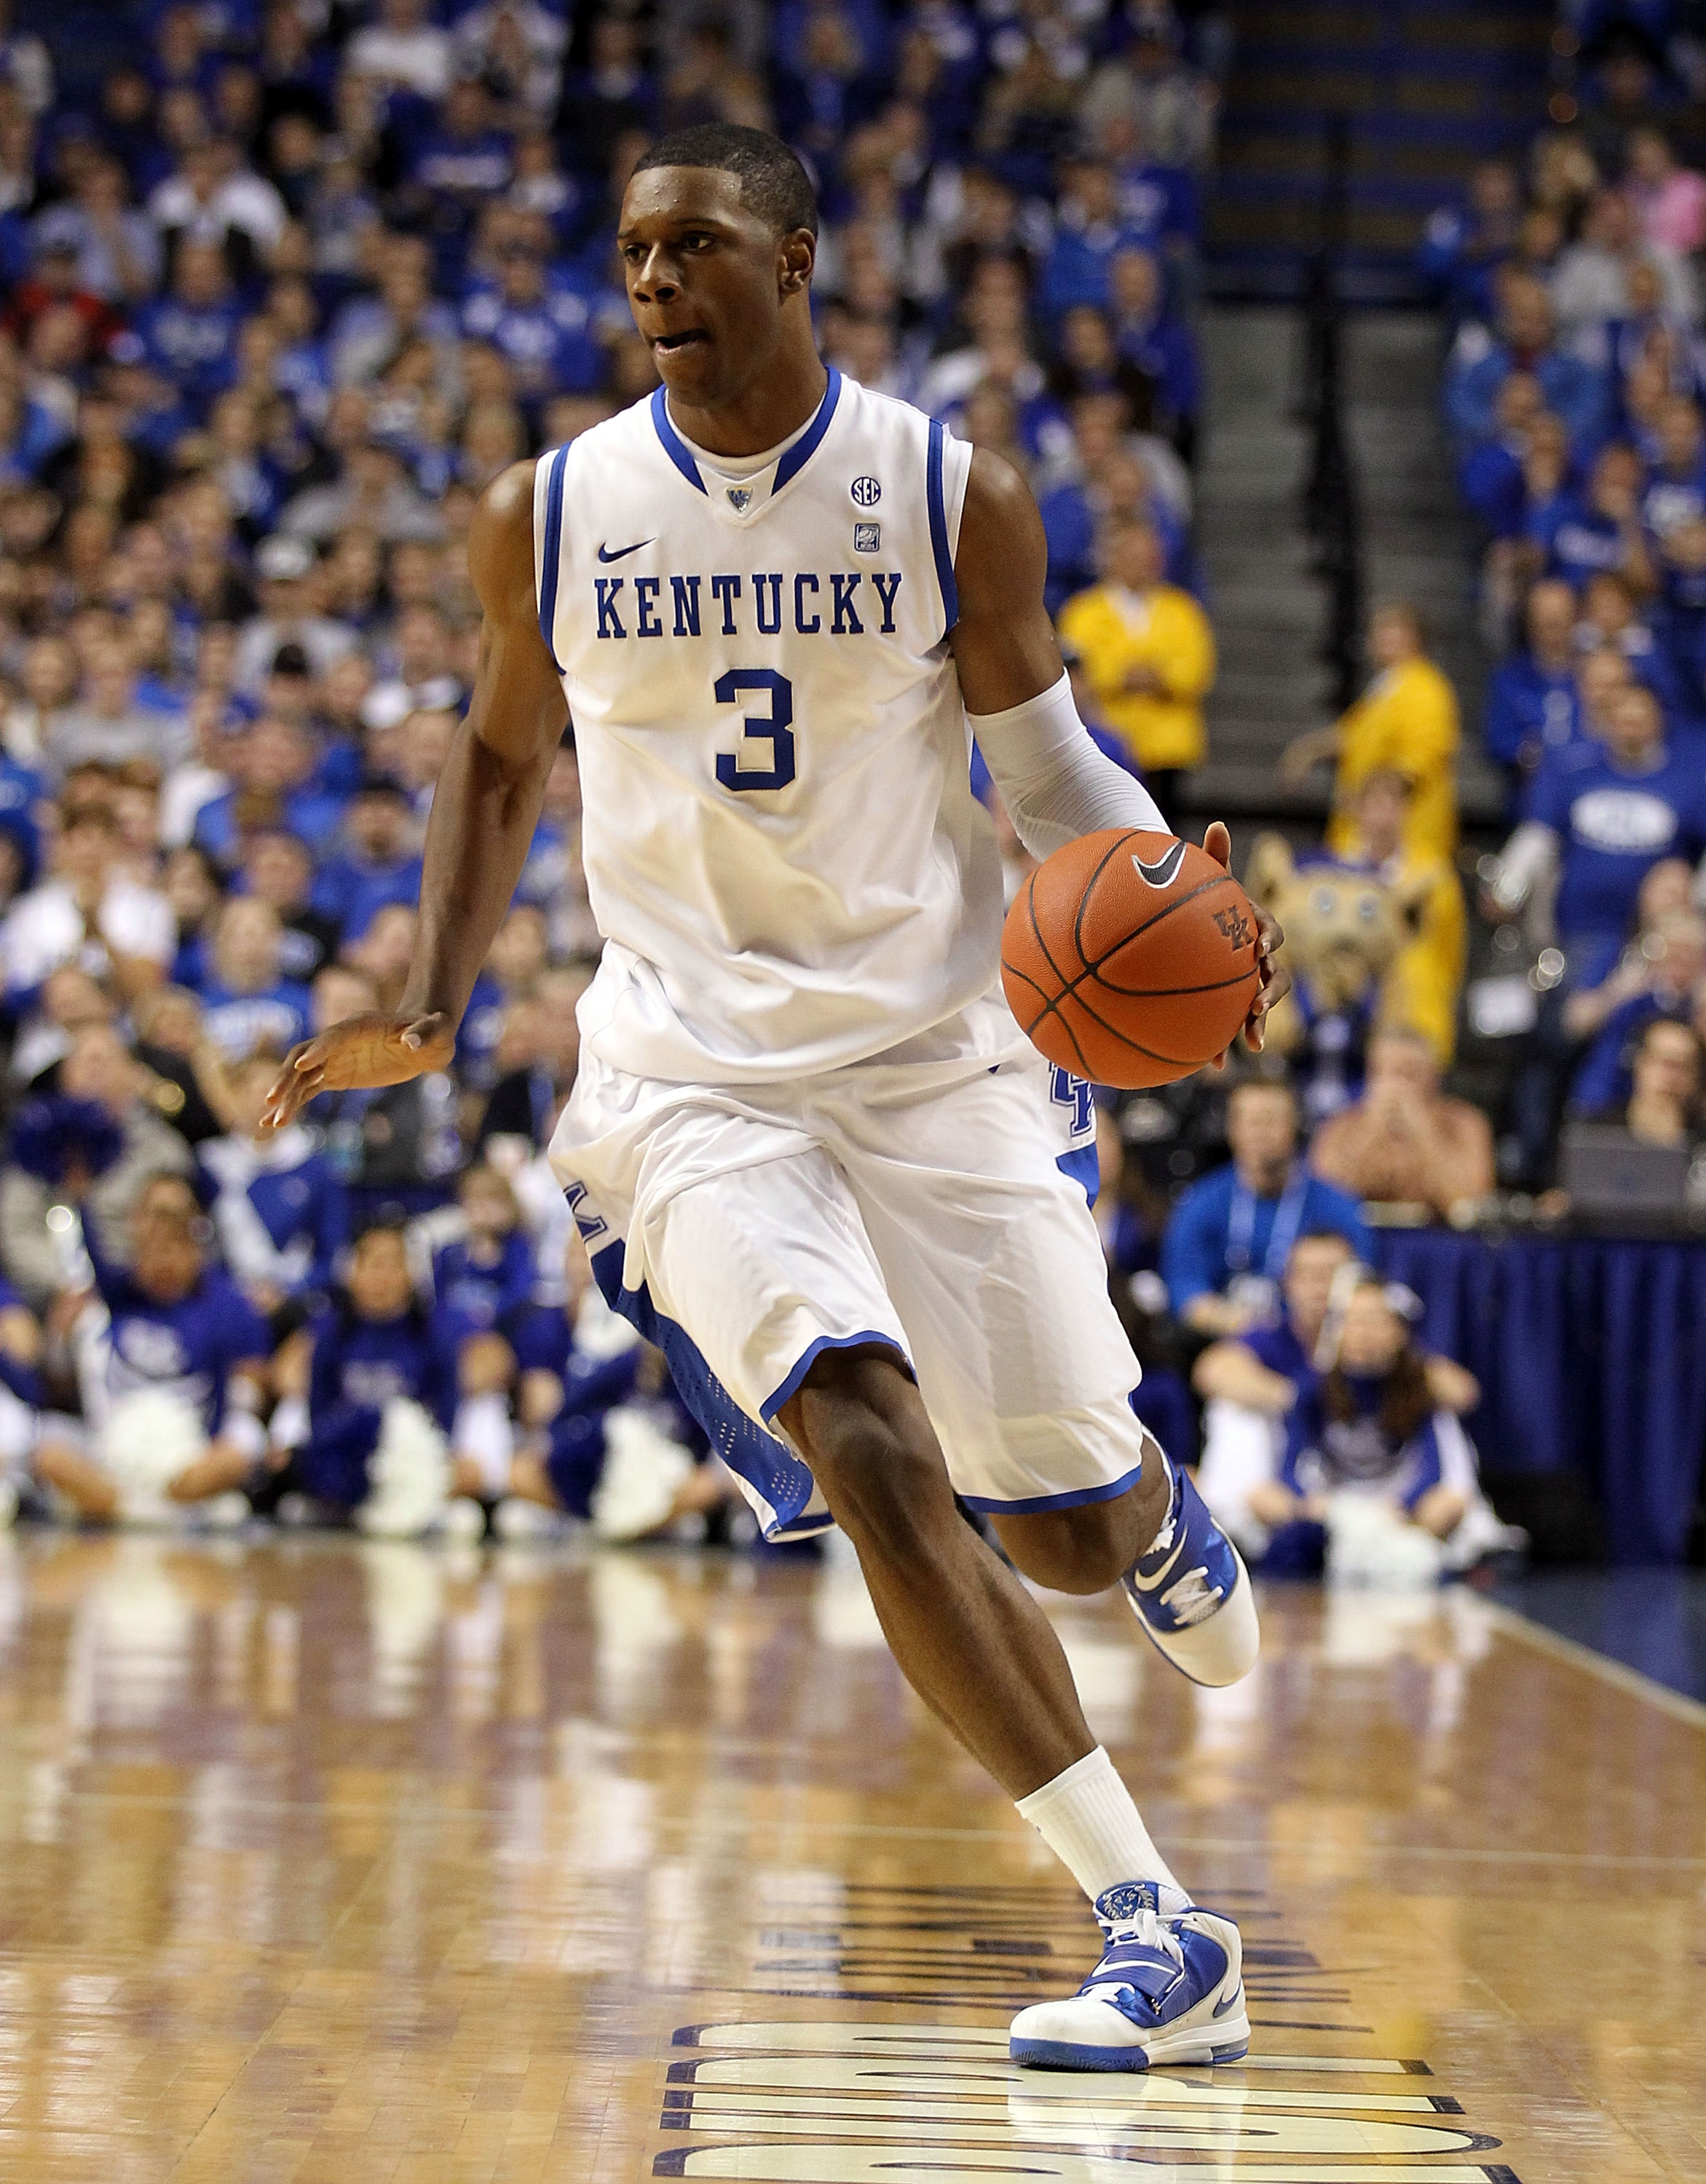 LEXINGTON, KY - JANUARY 03:  Terrence Jones #3 of the Kentucky Wildcats dribbles the ball during the game against the Penn Quakers at Rupp Arena on January 3, 2011 in Lexington, Kentucky.  (Photo by Andy Lyons/Getty Images)